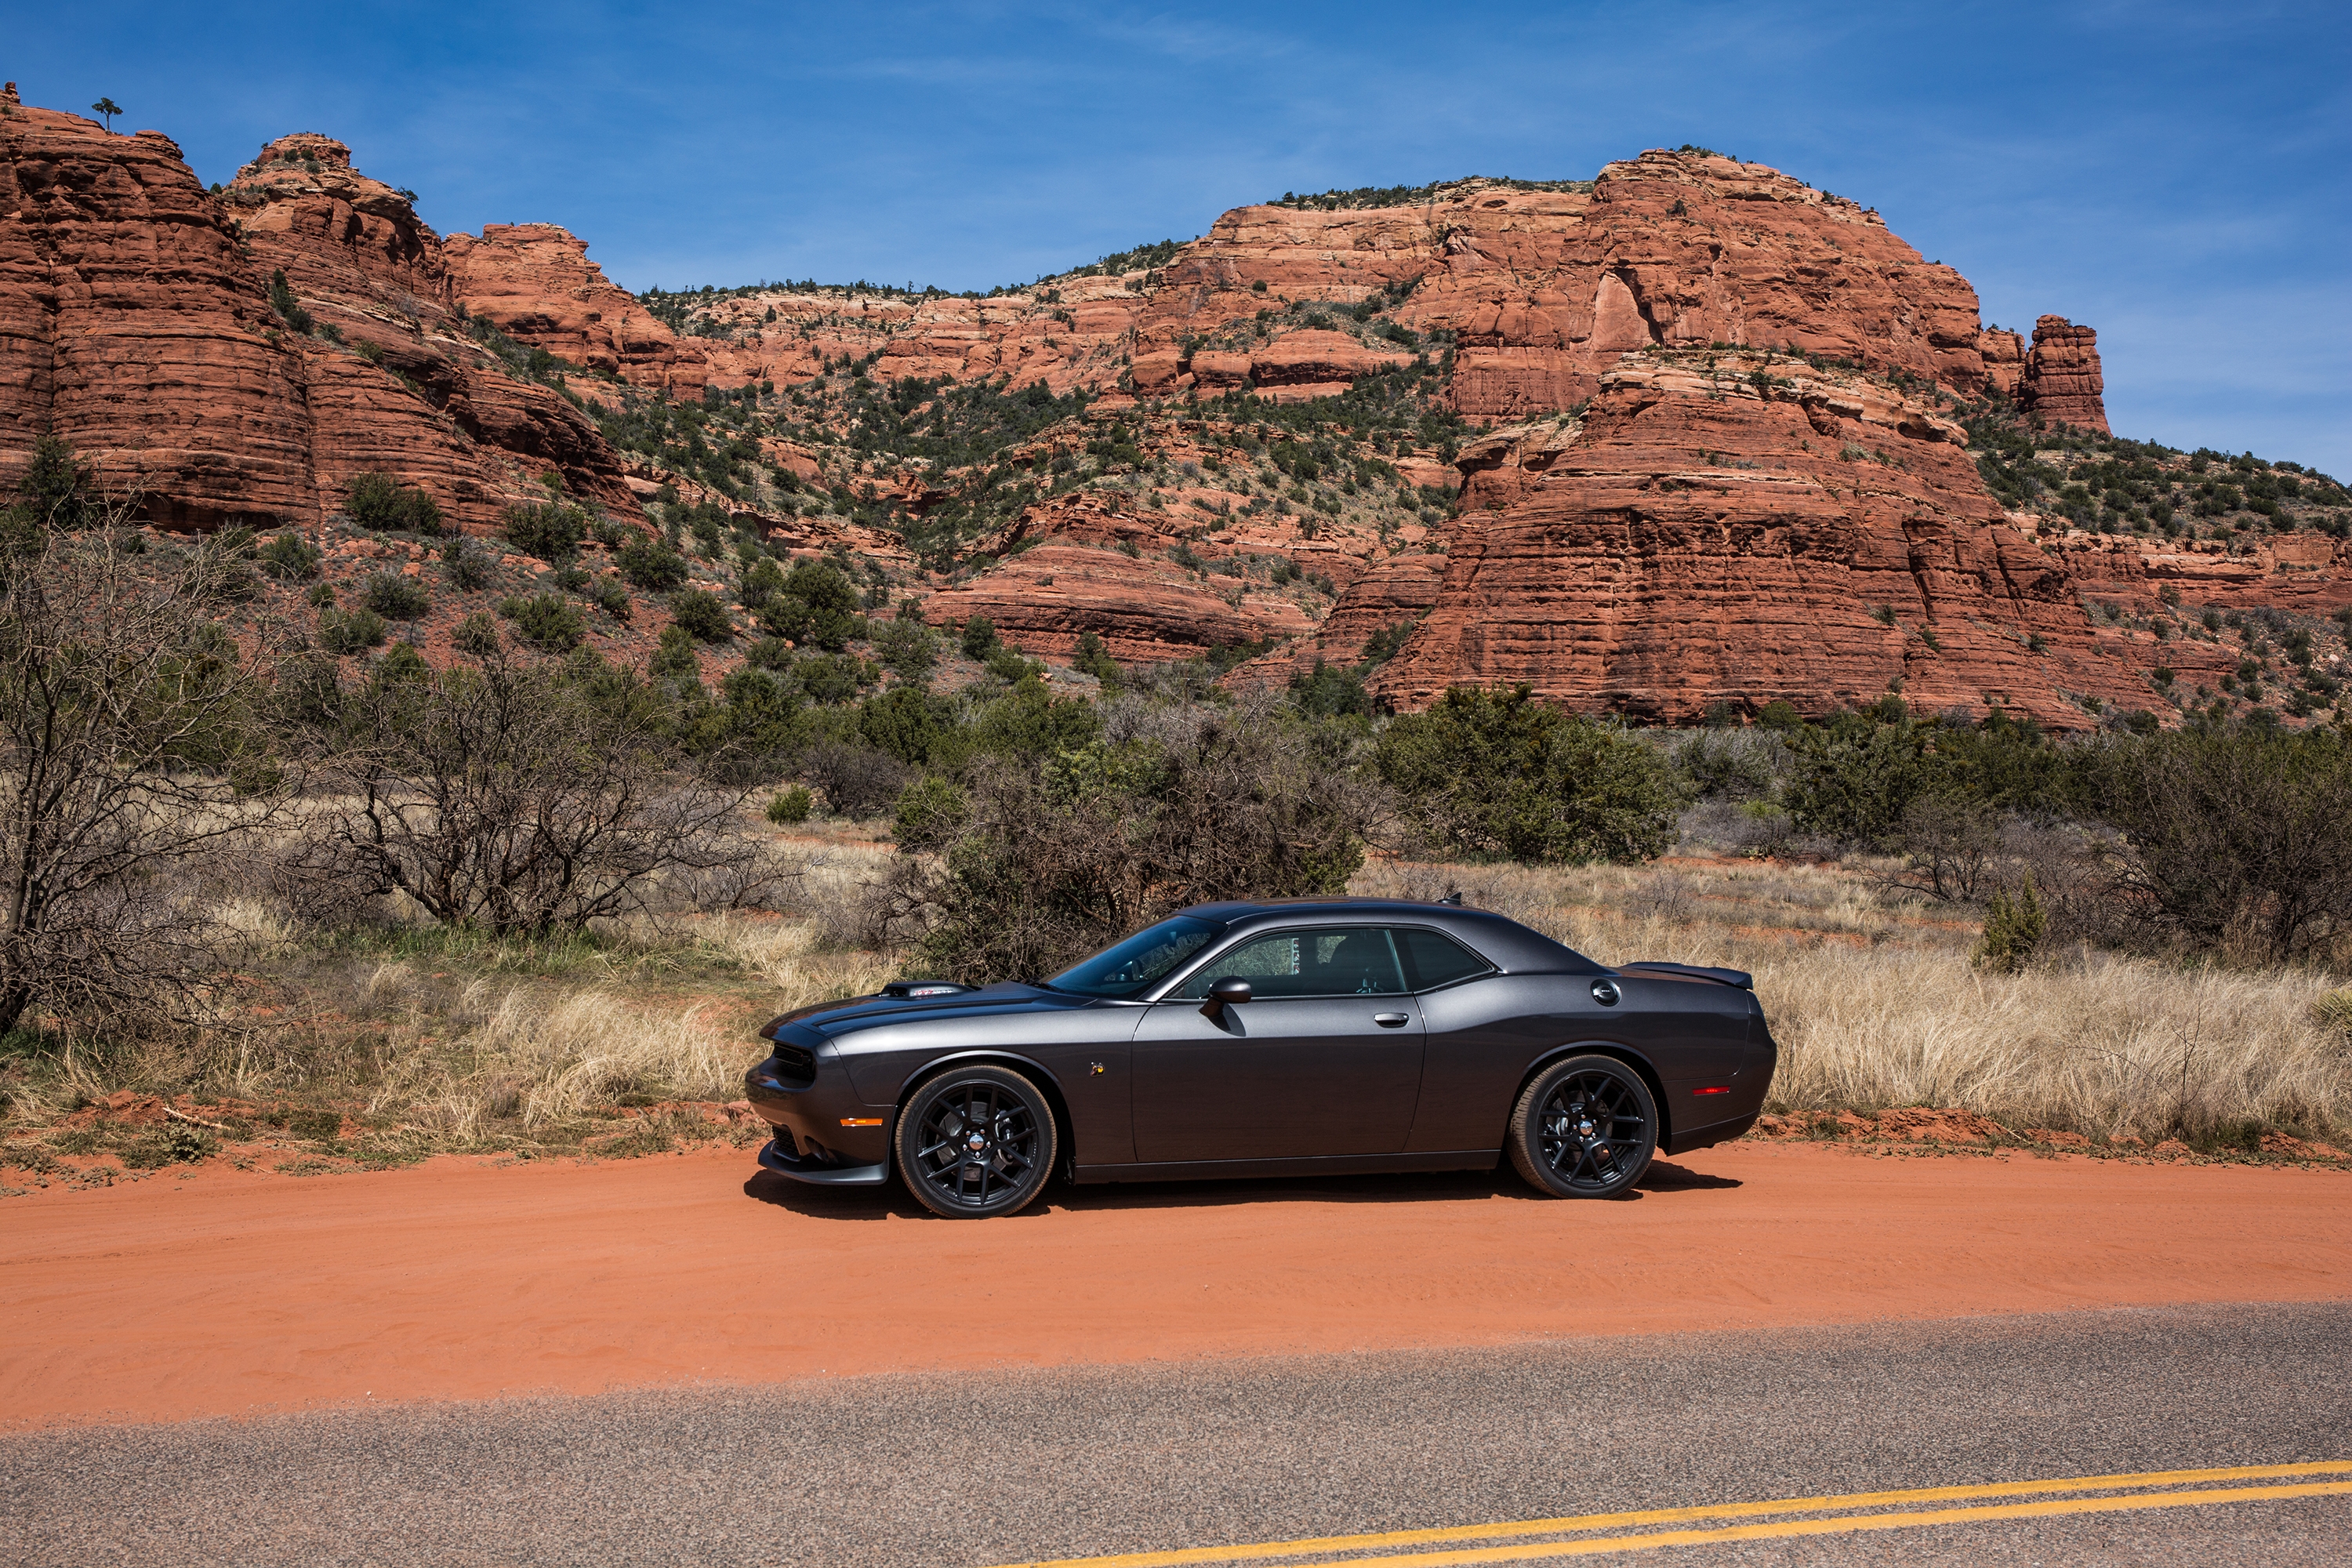 Wallpapers Dodge Challenger side view silver on the desktop